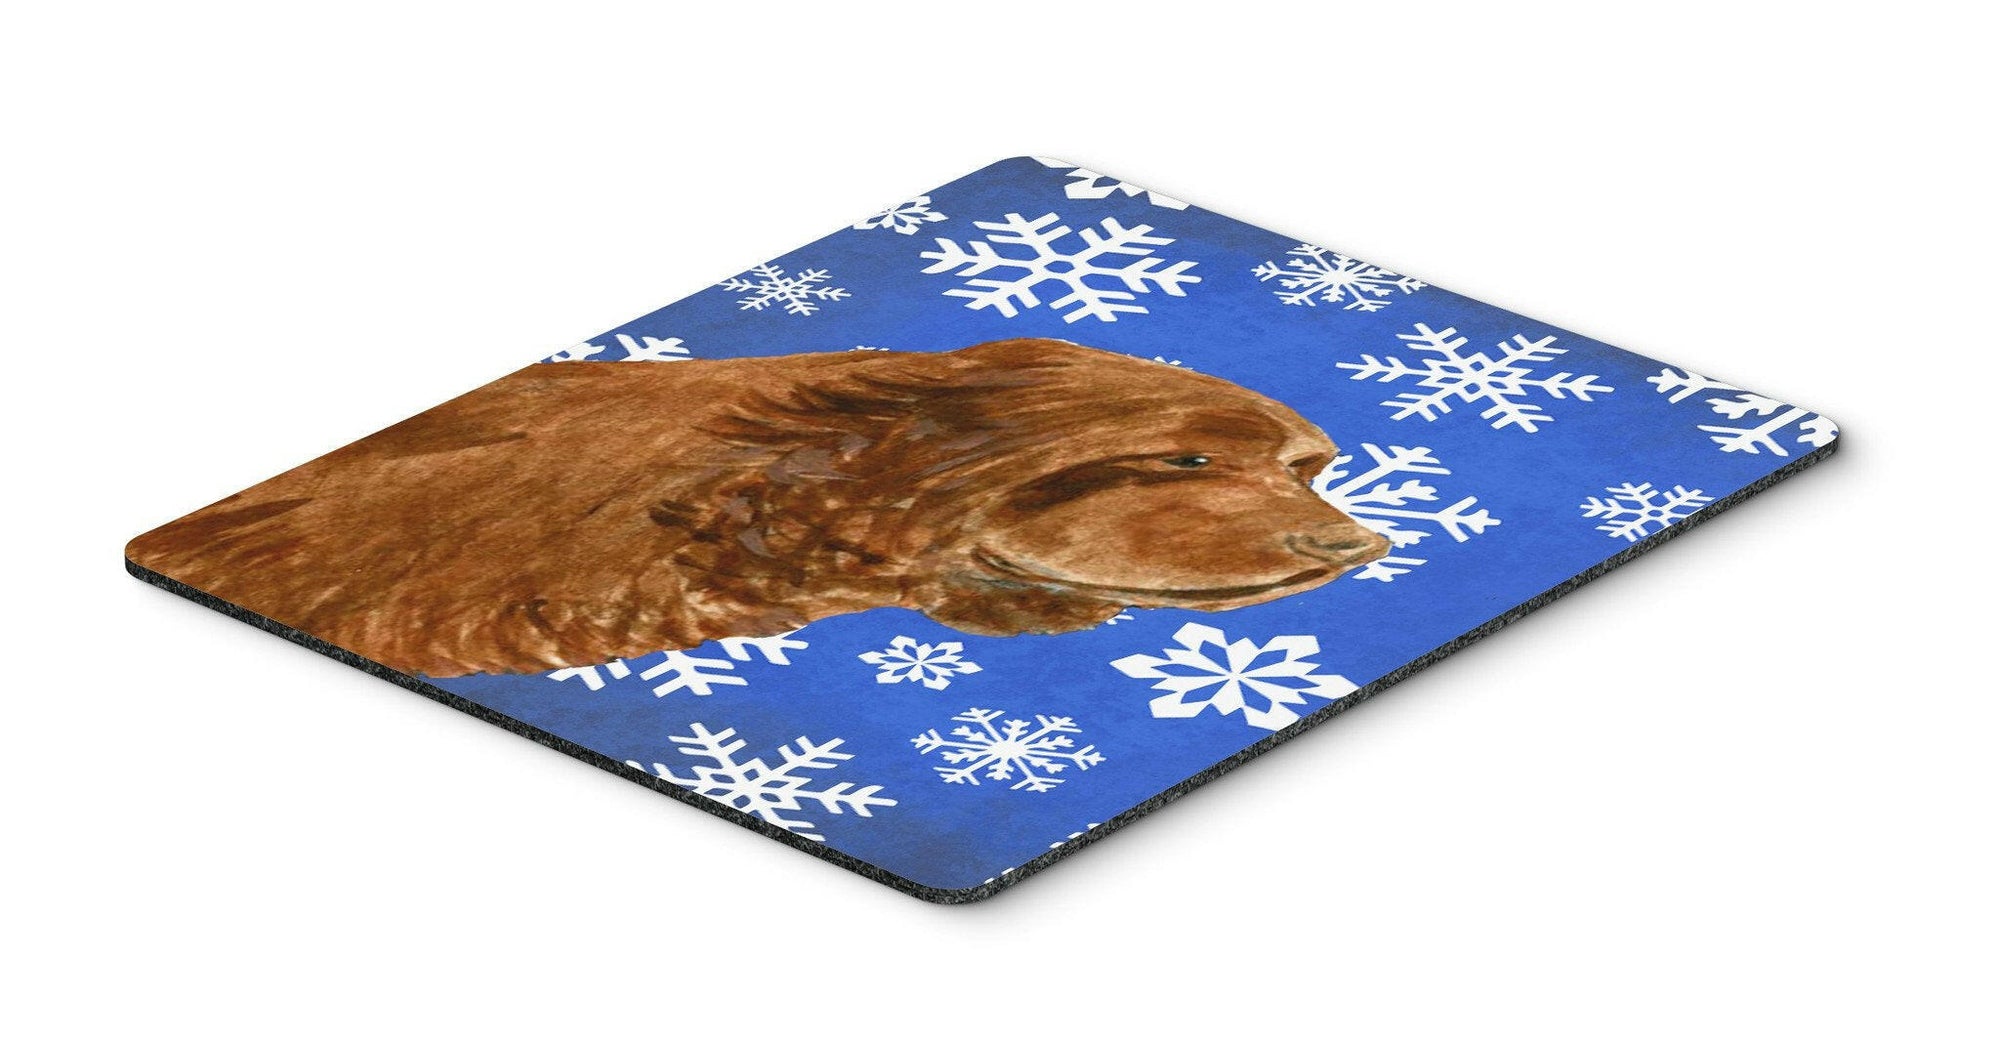 Sussex Spaniel Winter Snowflakes Holiday Mouse Pad, Hot Pad or Trivet by Caroline's Treasures